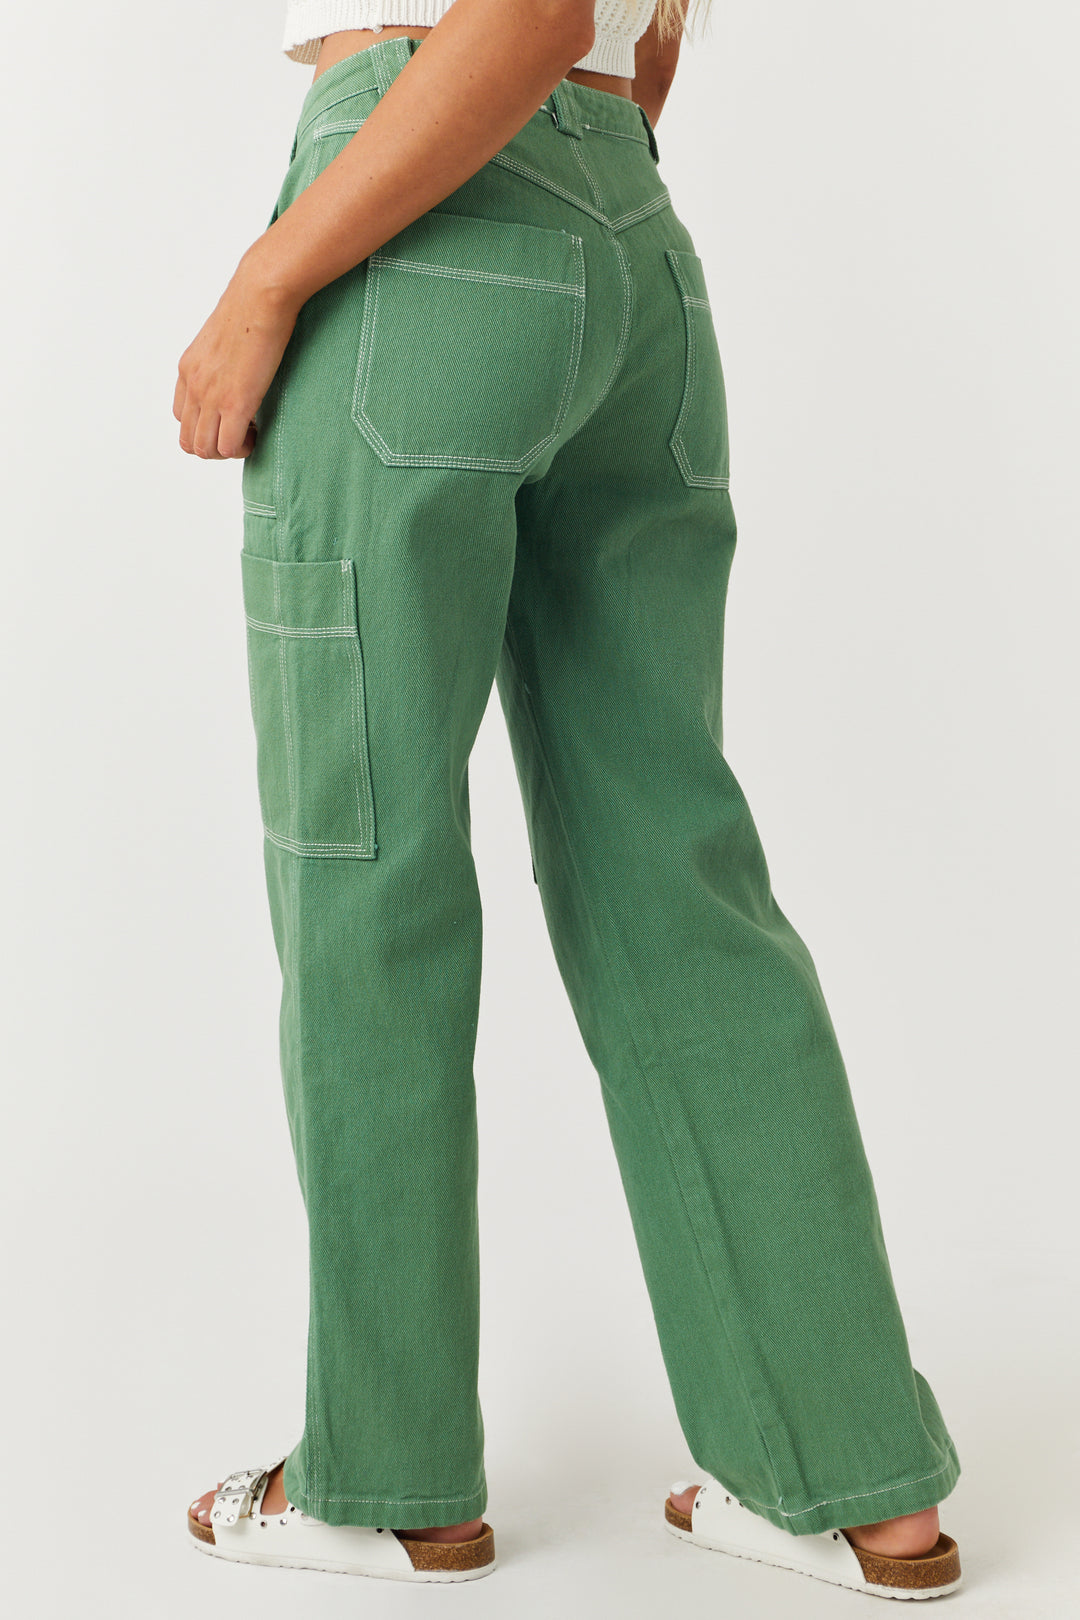 Dusty Olive Wide Leg Cargo Pants with White Stitching | Lime Lush